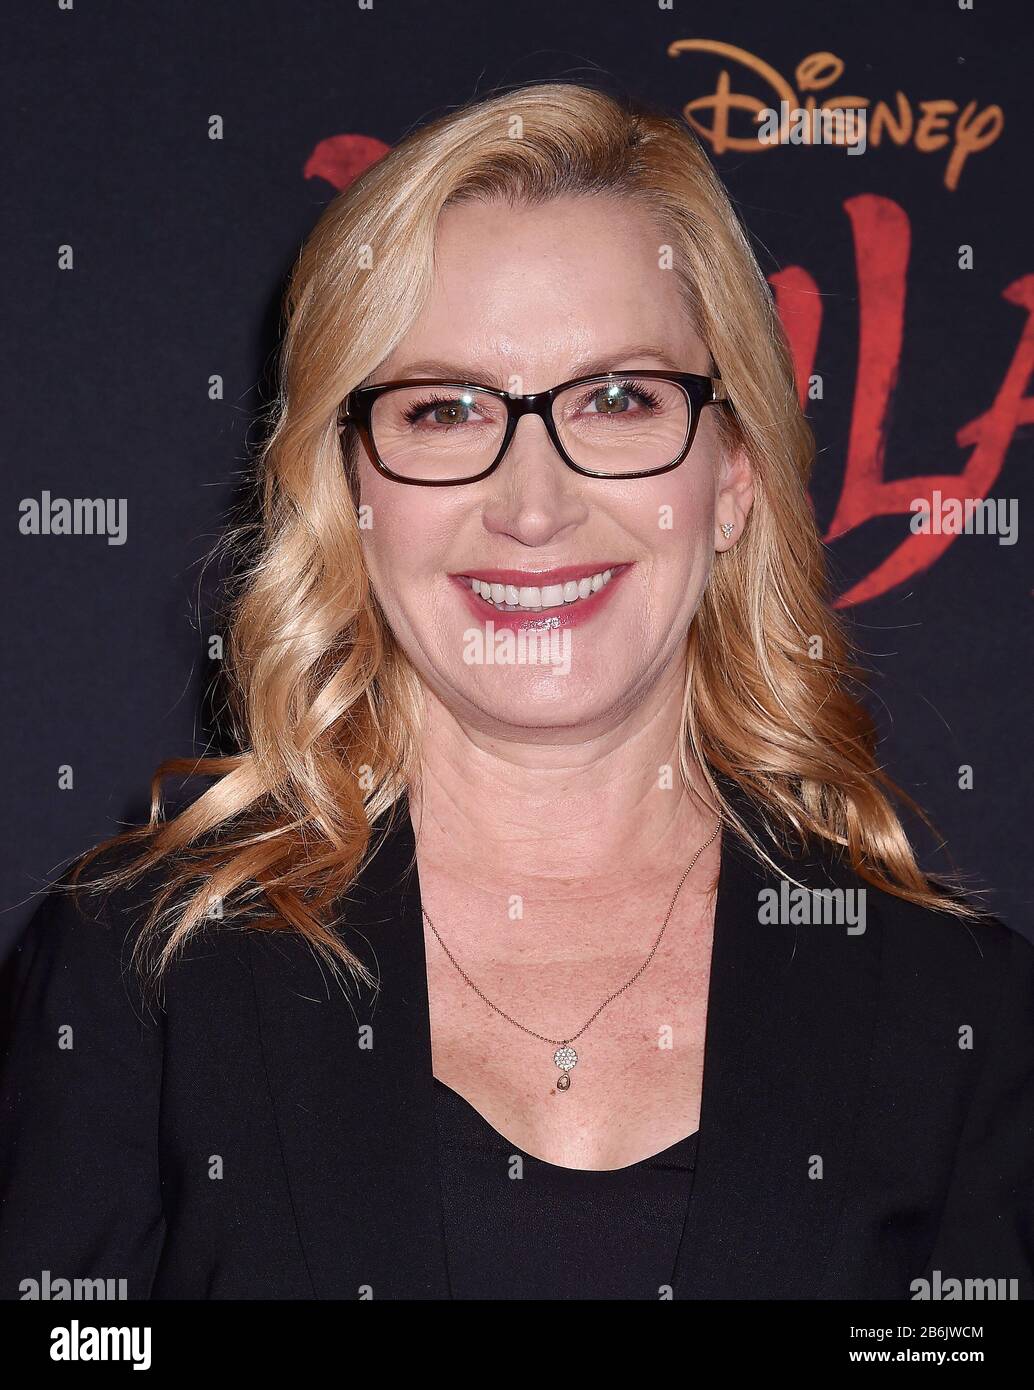 HOLLYWOOD, CA - MARCH 09: Angela Kinsey attends the premiere of Disney's 'Mulan' at the El Capitan Theatre on March 09, 2020 in Hollywood, California. Stock Photo